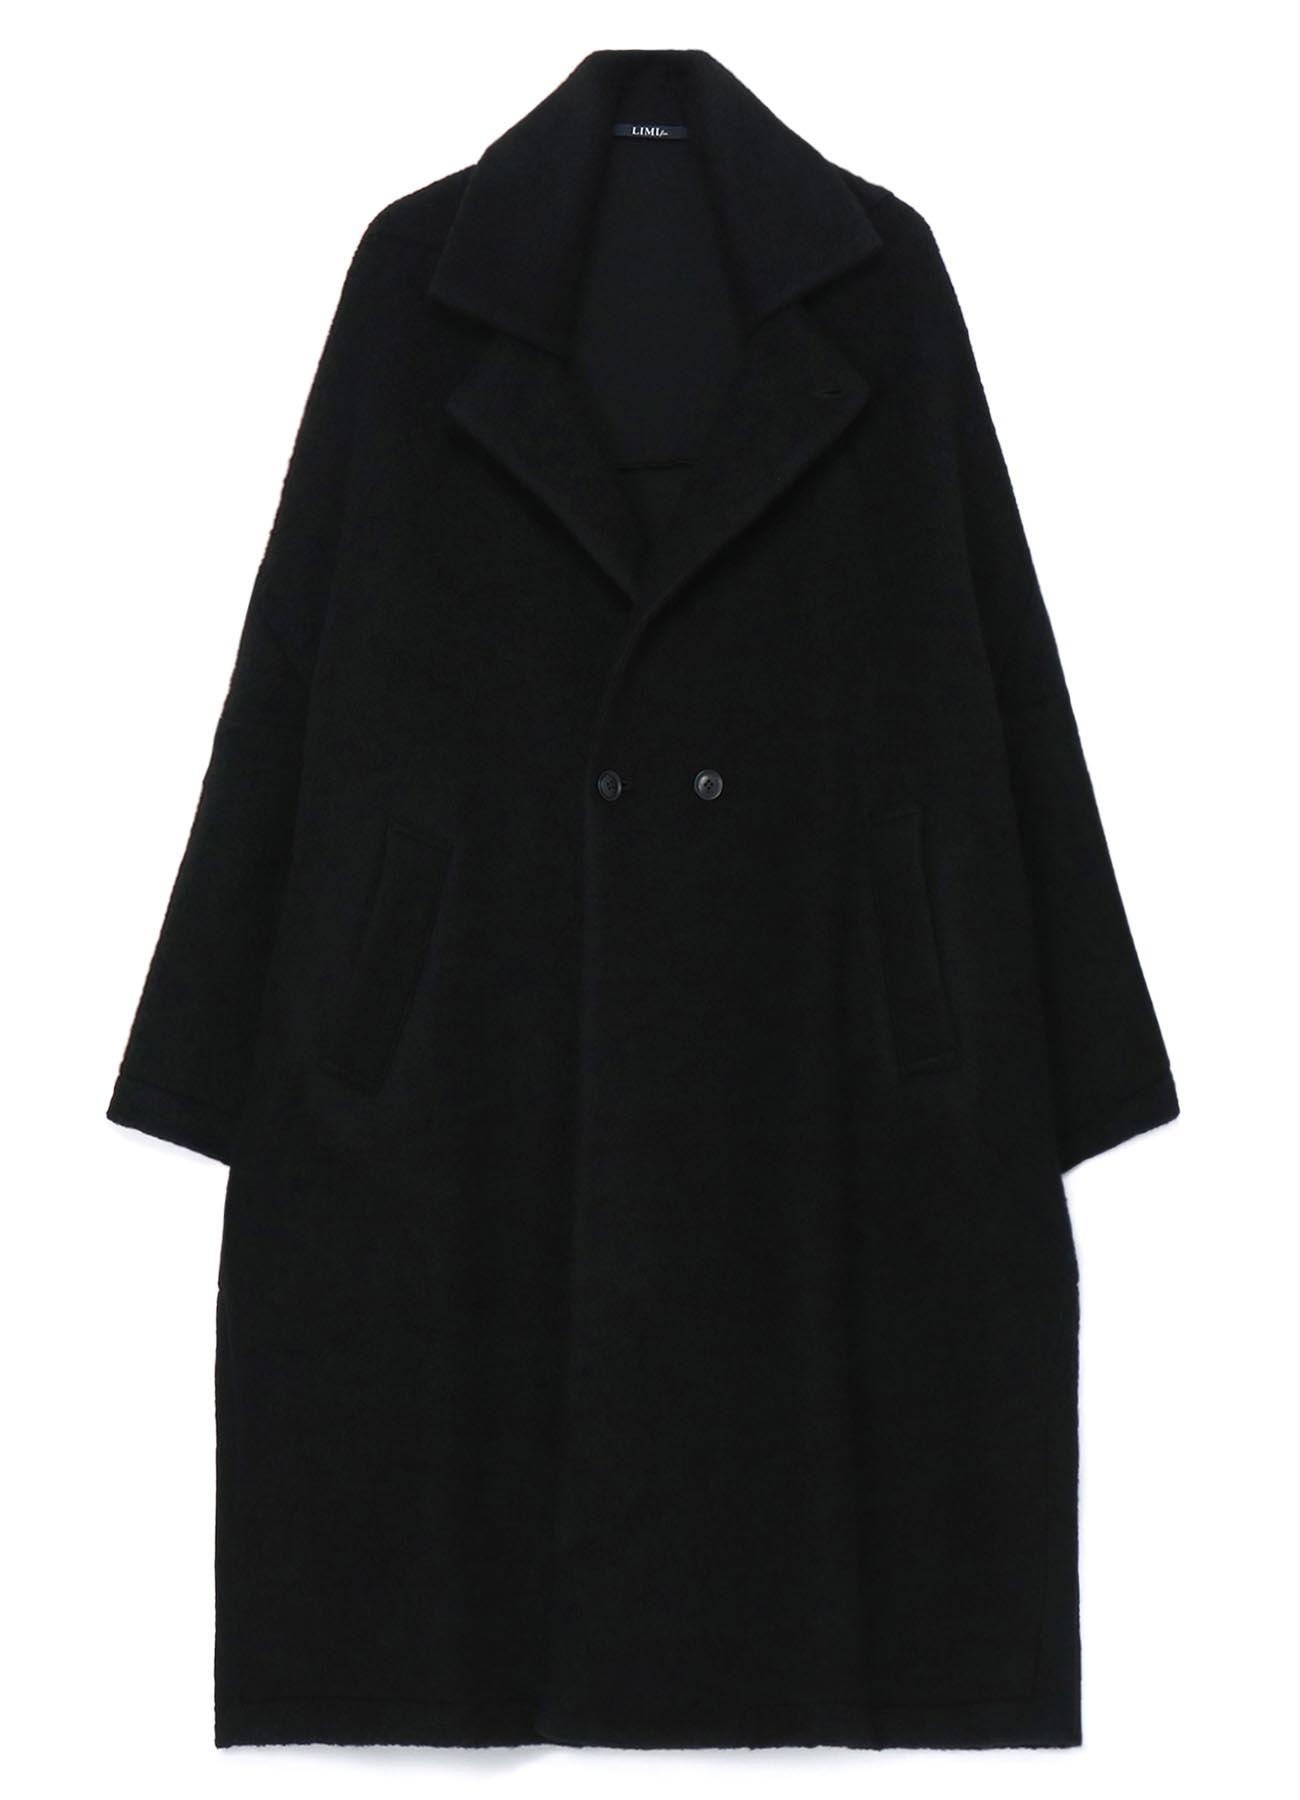 SHEEP PILE LONG JACKET WITH DOUBLE FRONT BUTTON